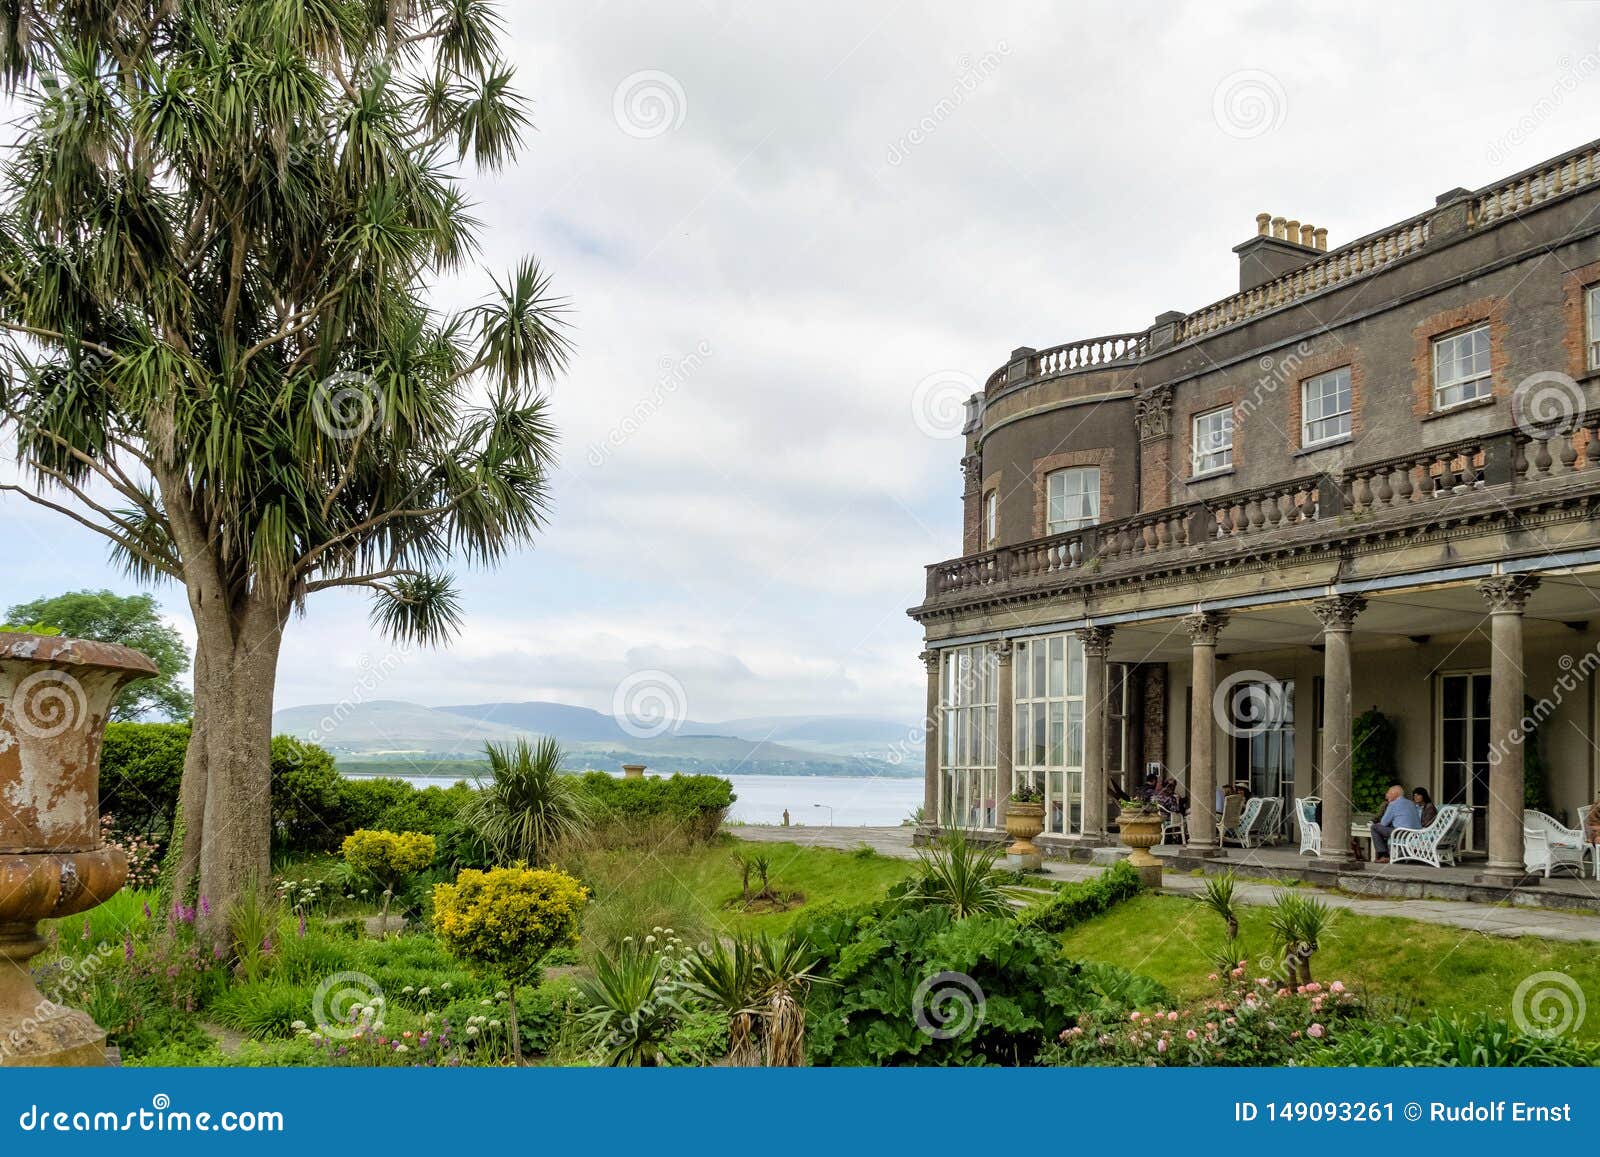 Bantry House dating from the 18th century County Cork 